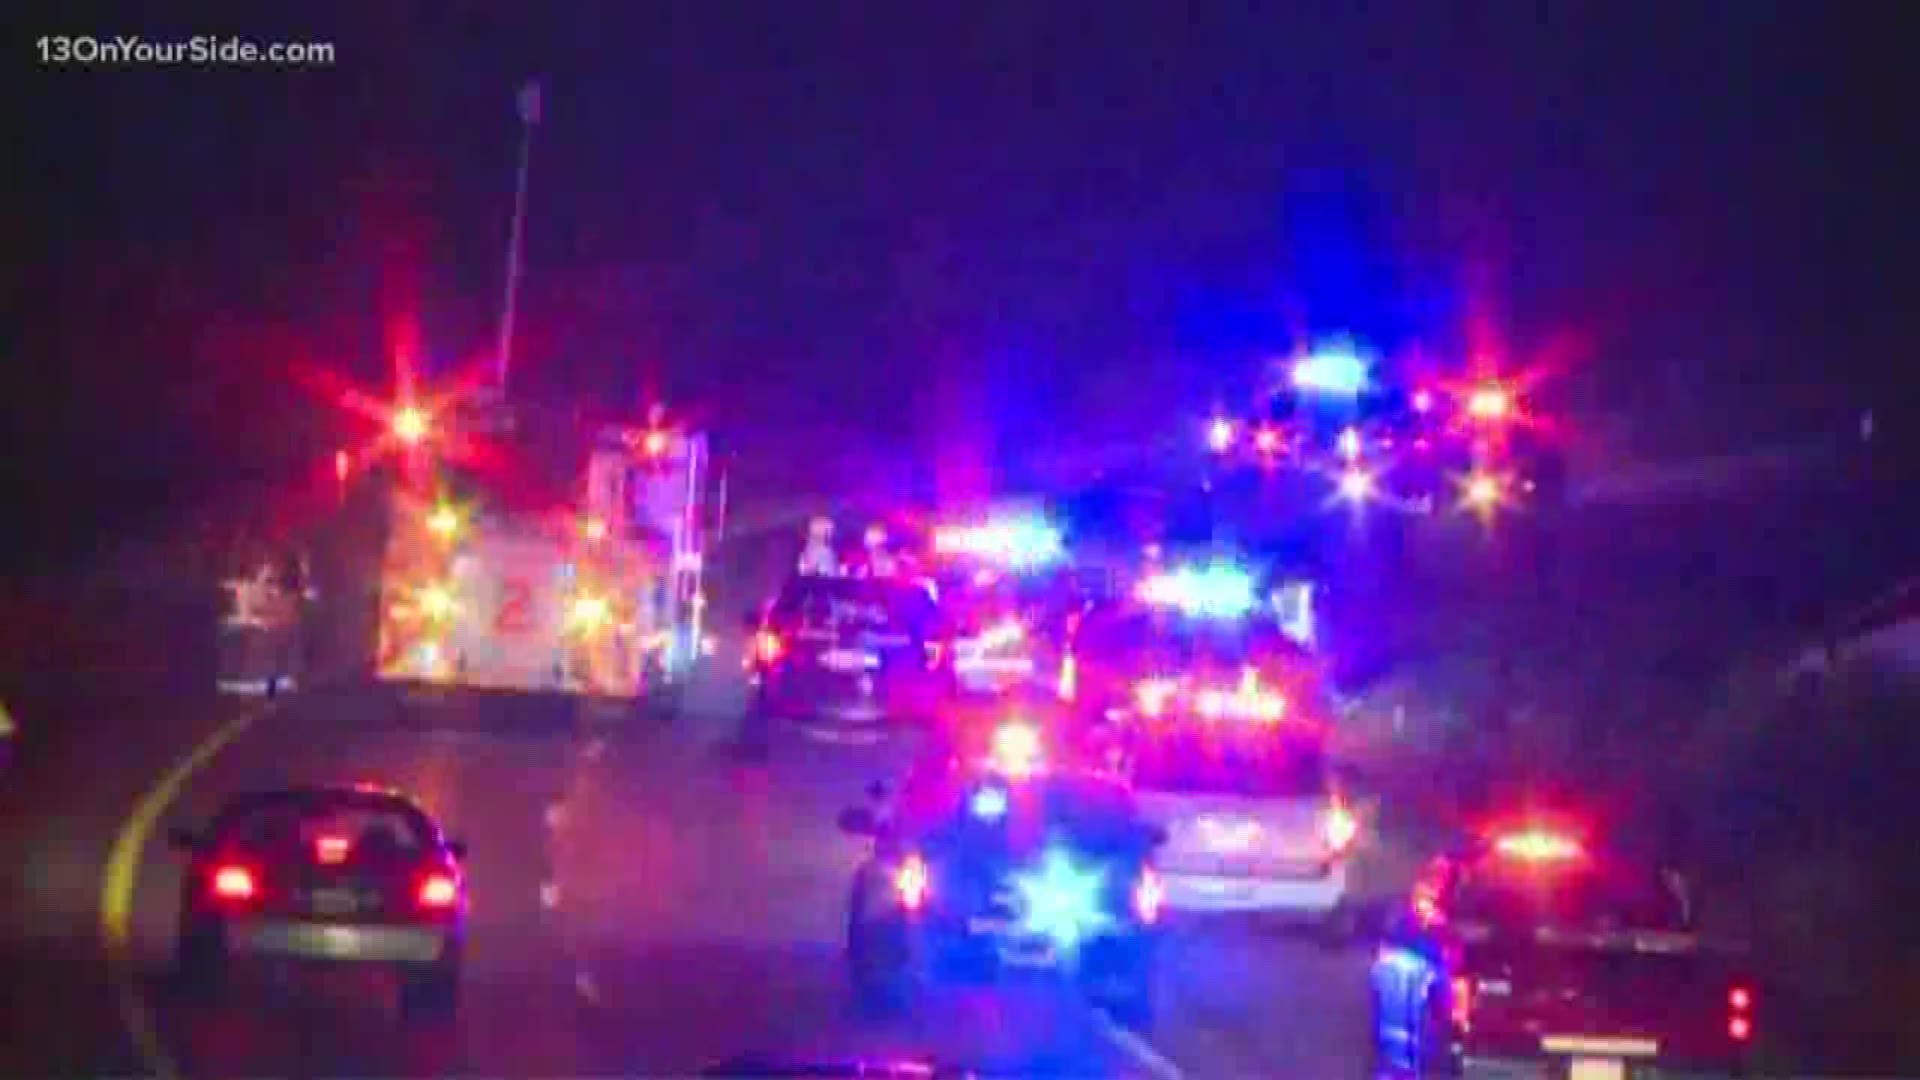 Authorities closed down WB lanes of I-96 west of Fruit Ridge Avenue NW following a serious crash that sent at least one person to the hospital. It's been hours, but the highway is open again.